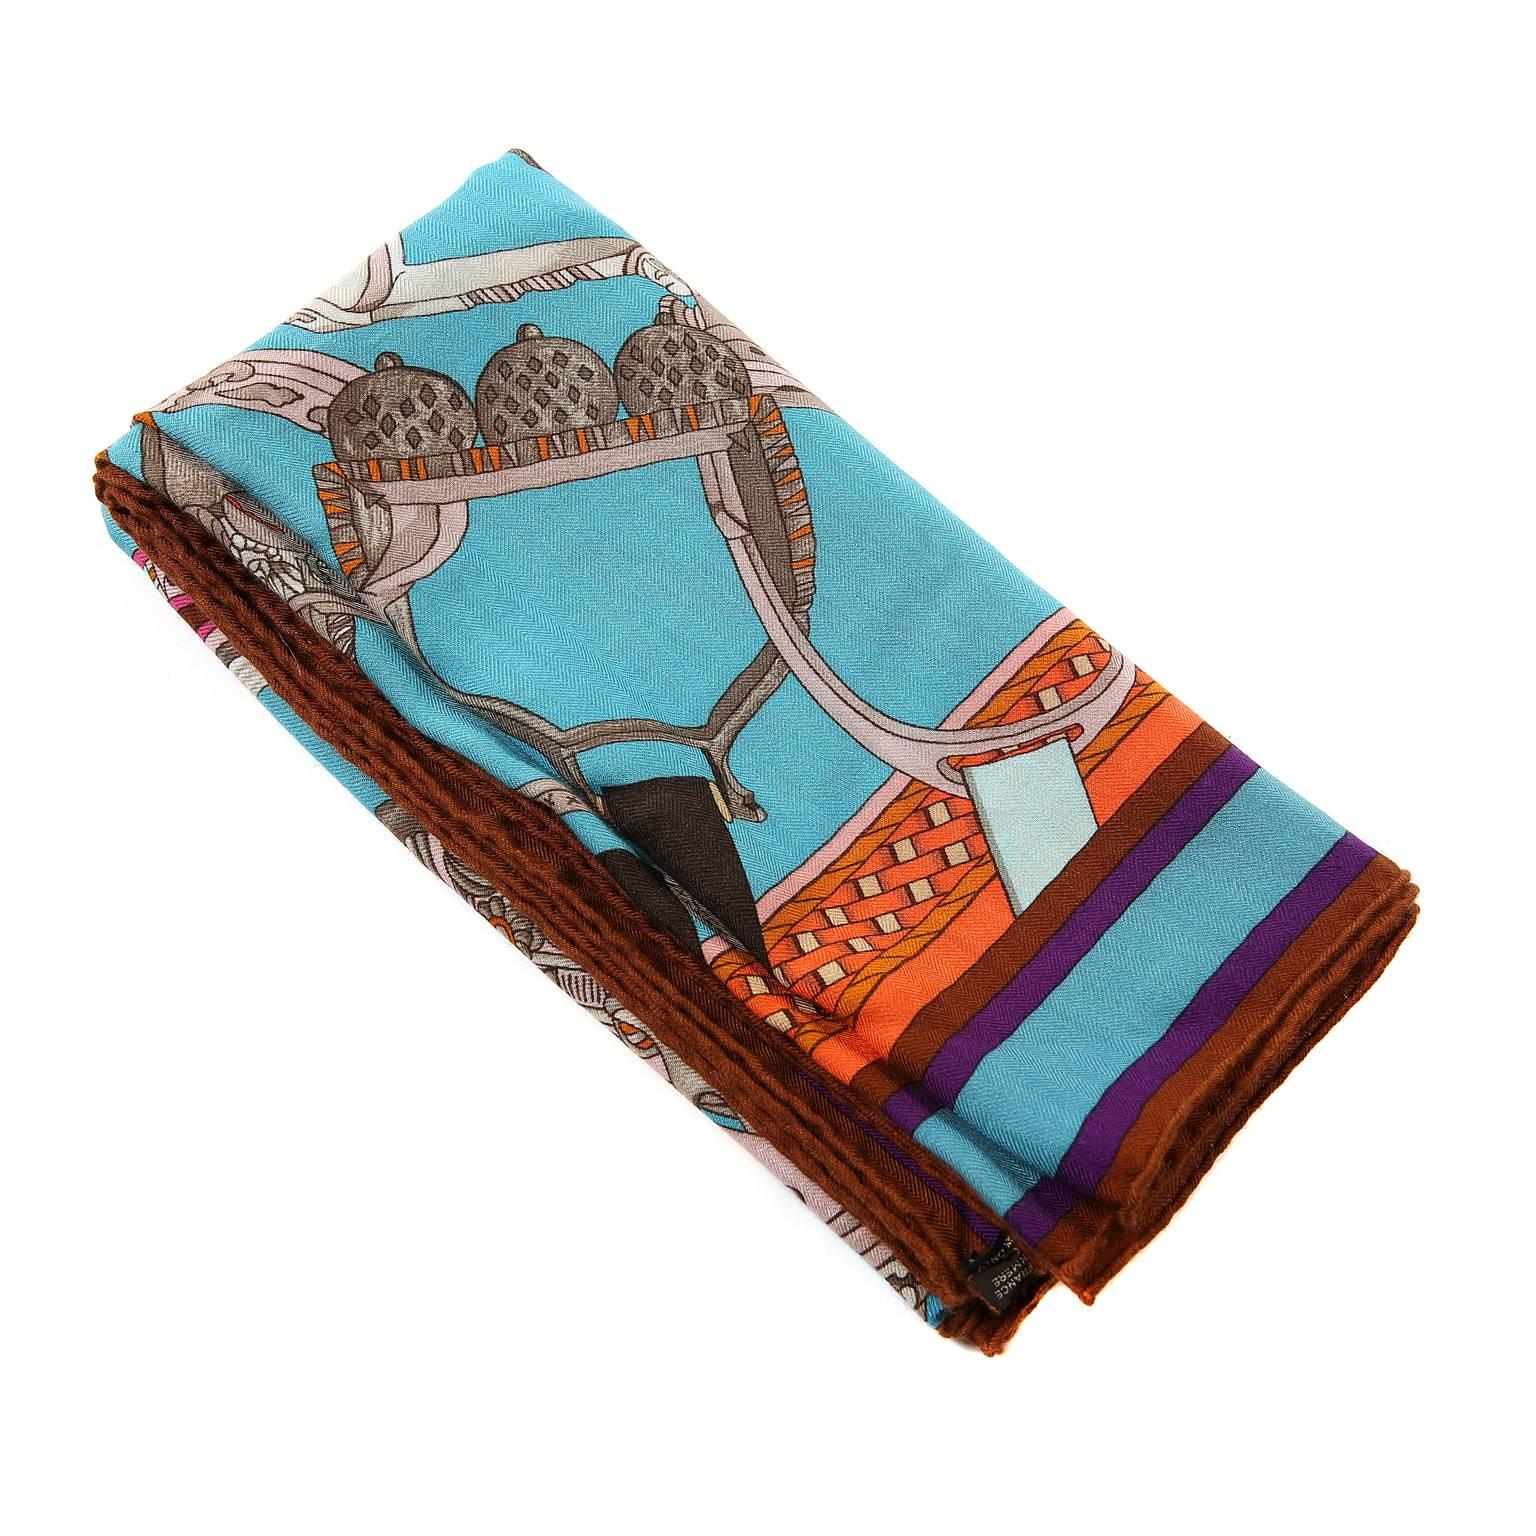 Hermès Turquoise Concours d’etriers Cashmere and Silk Shawl- Pristine
  The equestrian themed design features an array of antique stirrups, highlighting the intricate metalwork and exquisite details.       Turquoise background with orange, purple,